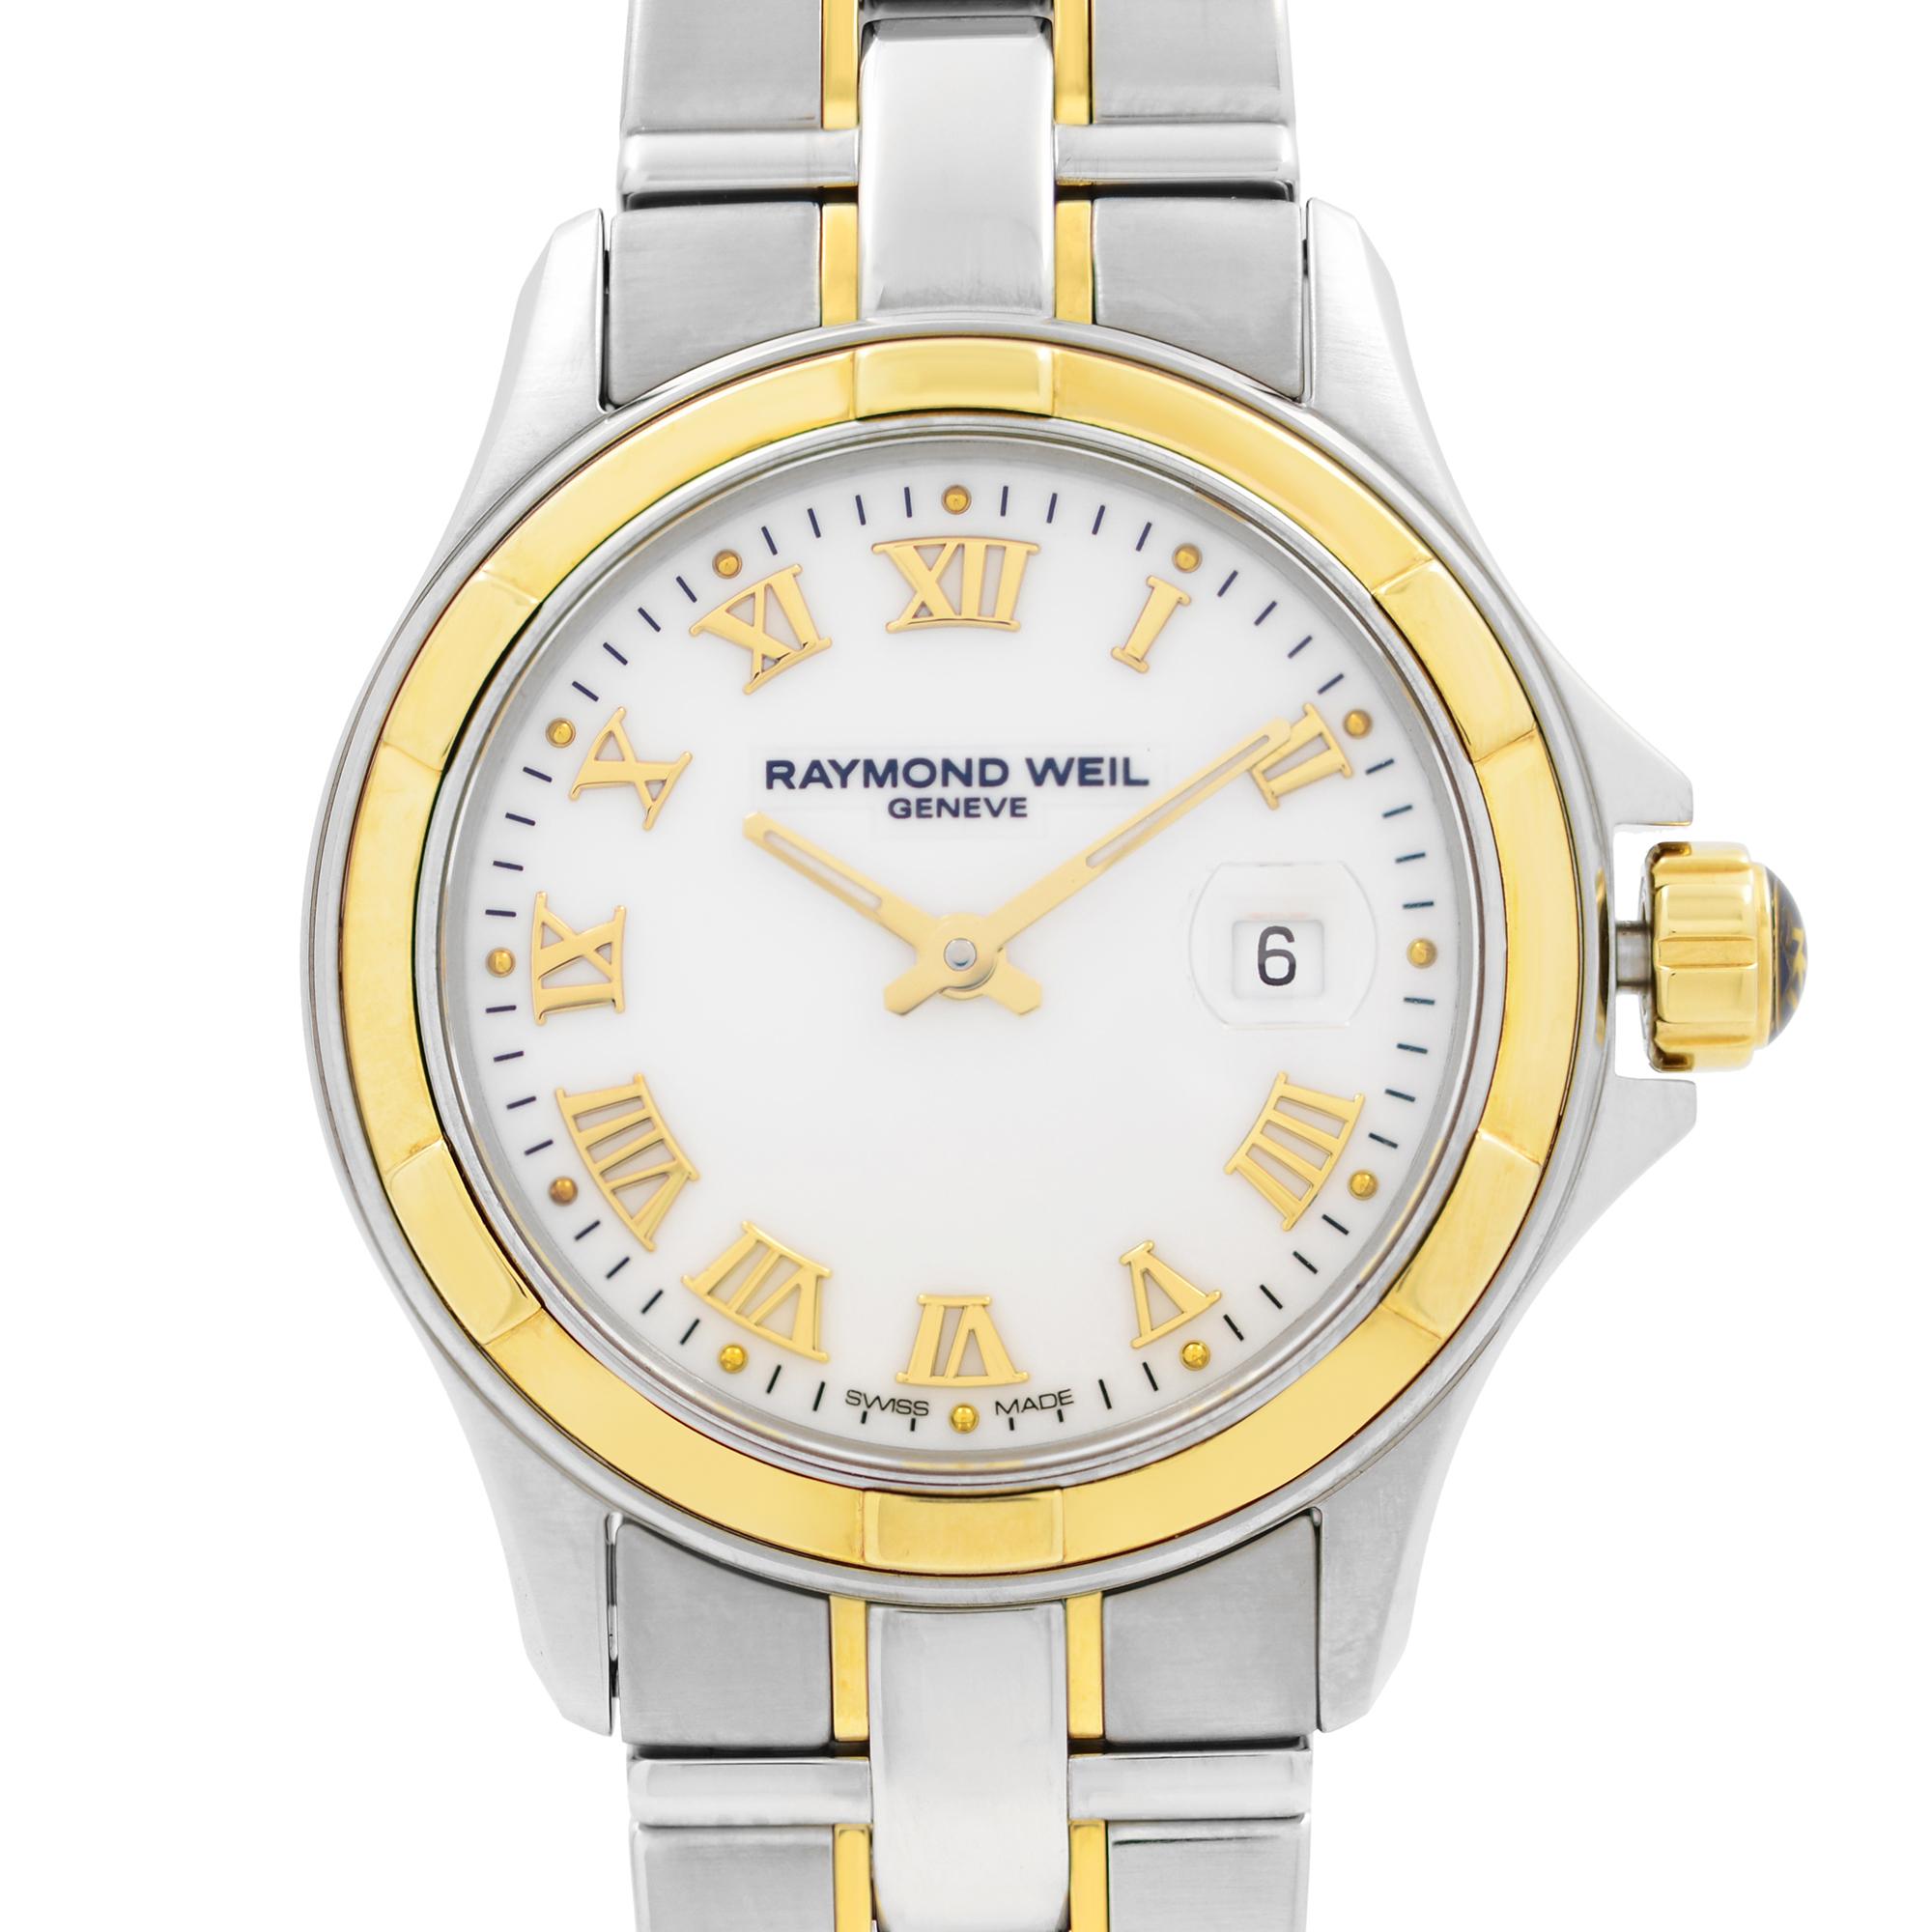 Never Worn Raymond Weil Parsifal 18k Gold PVD Steel White Dial Ladies Watch 9460-SG-00308. This Beautiful Timepiece Features: Stainless Steel Case and Bracelet with 18k Yellow Gold Accents, Fixed Stainless Steel Bezel with an 18k Yellow Gold Inlaid